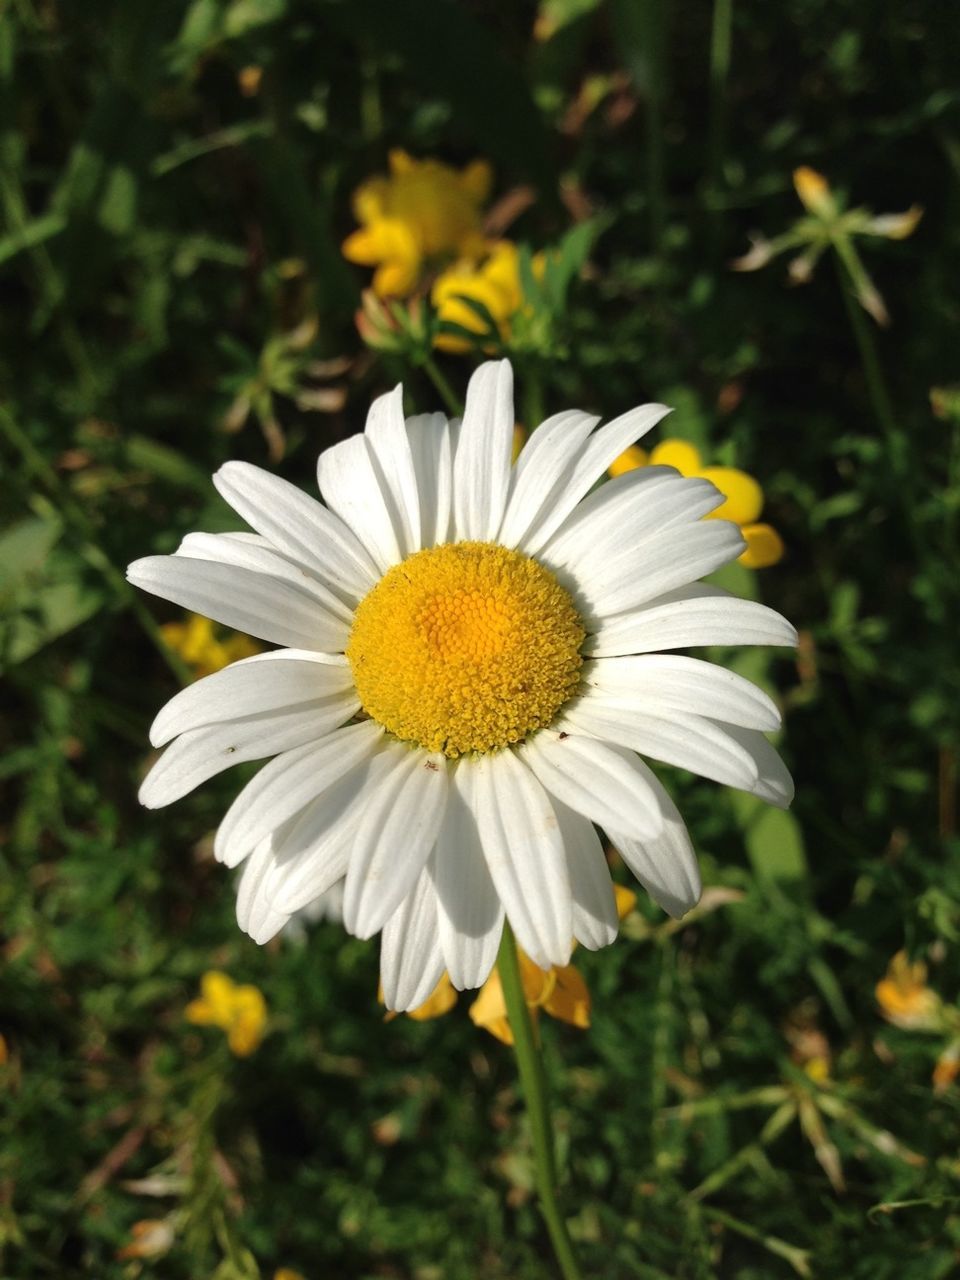 flower, petal, freshness, flower head, fragility, daisy, pollen, yellow, white color, growth, beauty in nature, blooming, close-up, focus on foreground, nature, plant, single flower, in bloom, field, high angle view